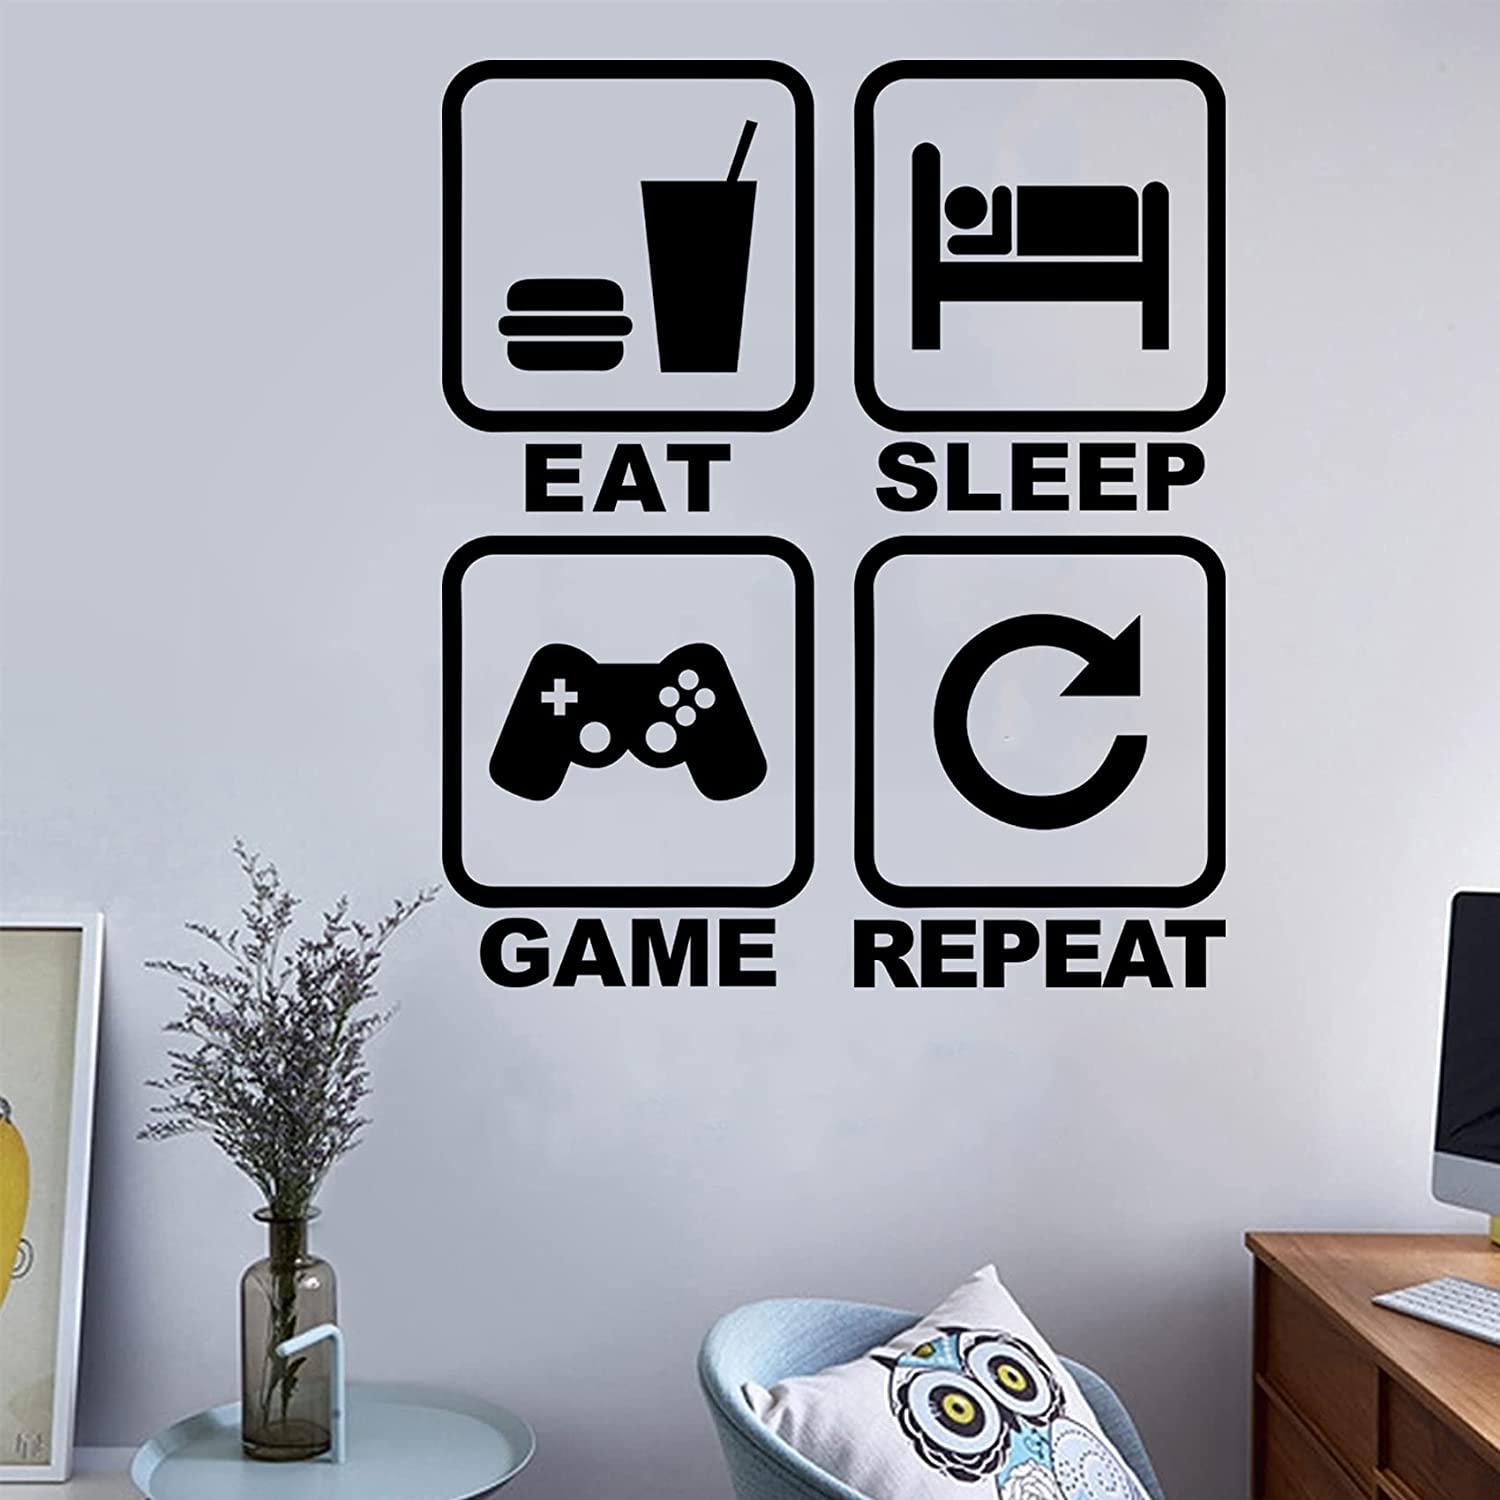 Eat sleep game repeat wall decal gamer wall stickers murals removable vinyl cute ntroller art design gamers world wall der for teen kids boys bedroom playroom home deration wallpaper home